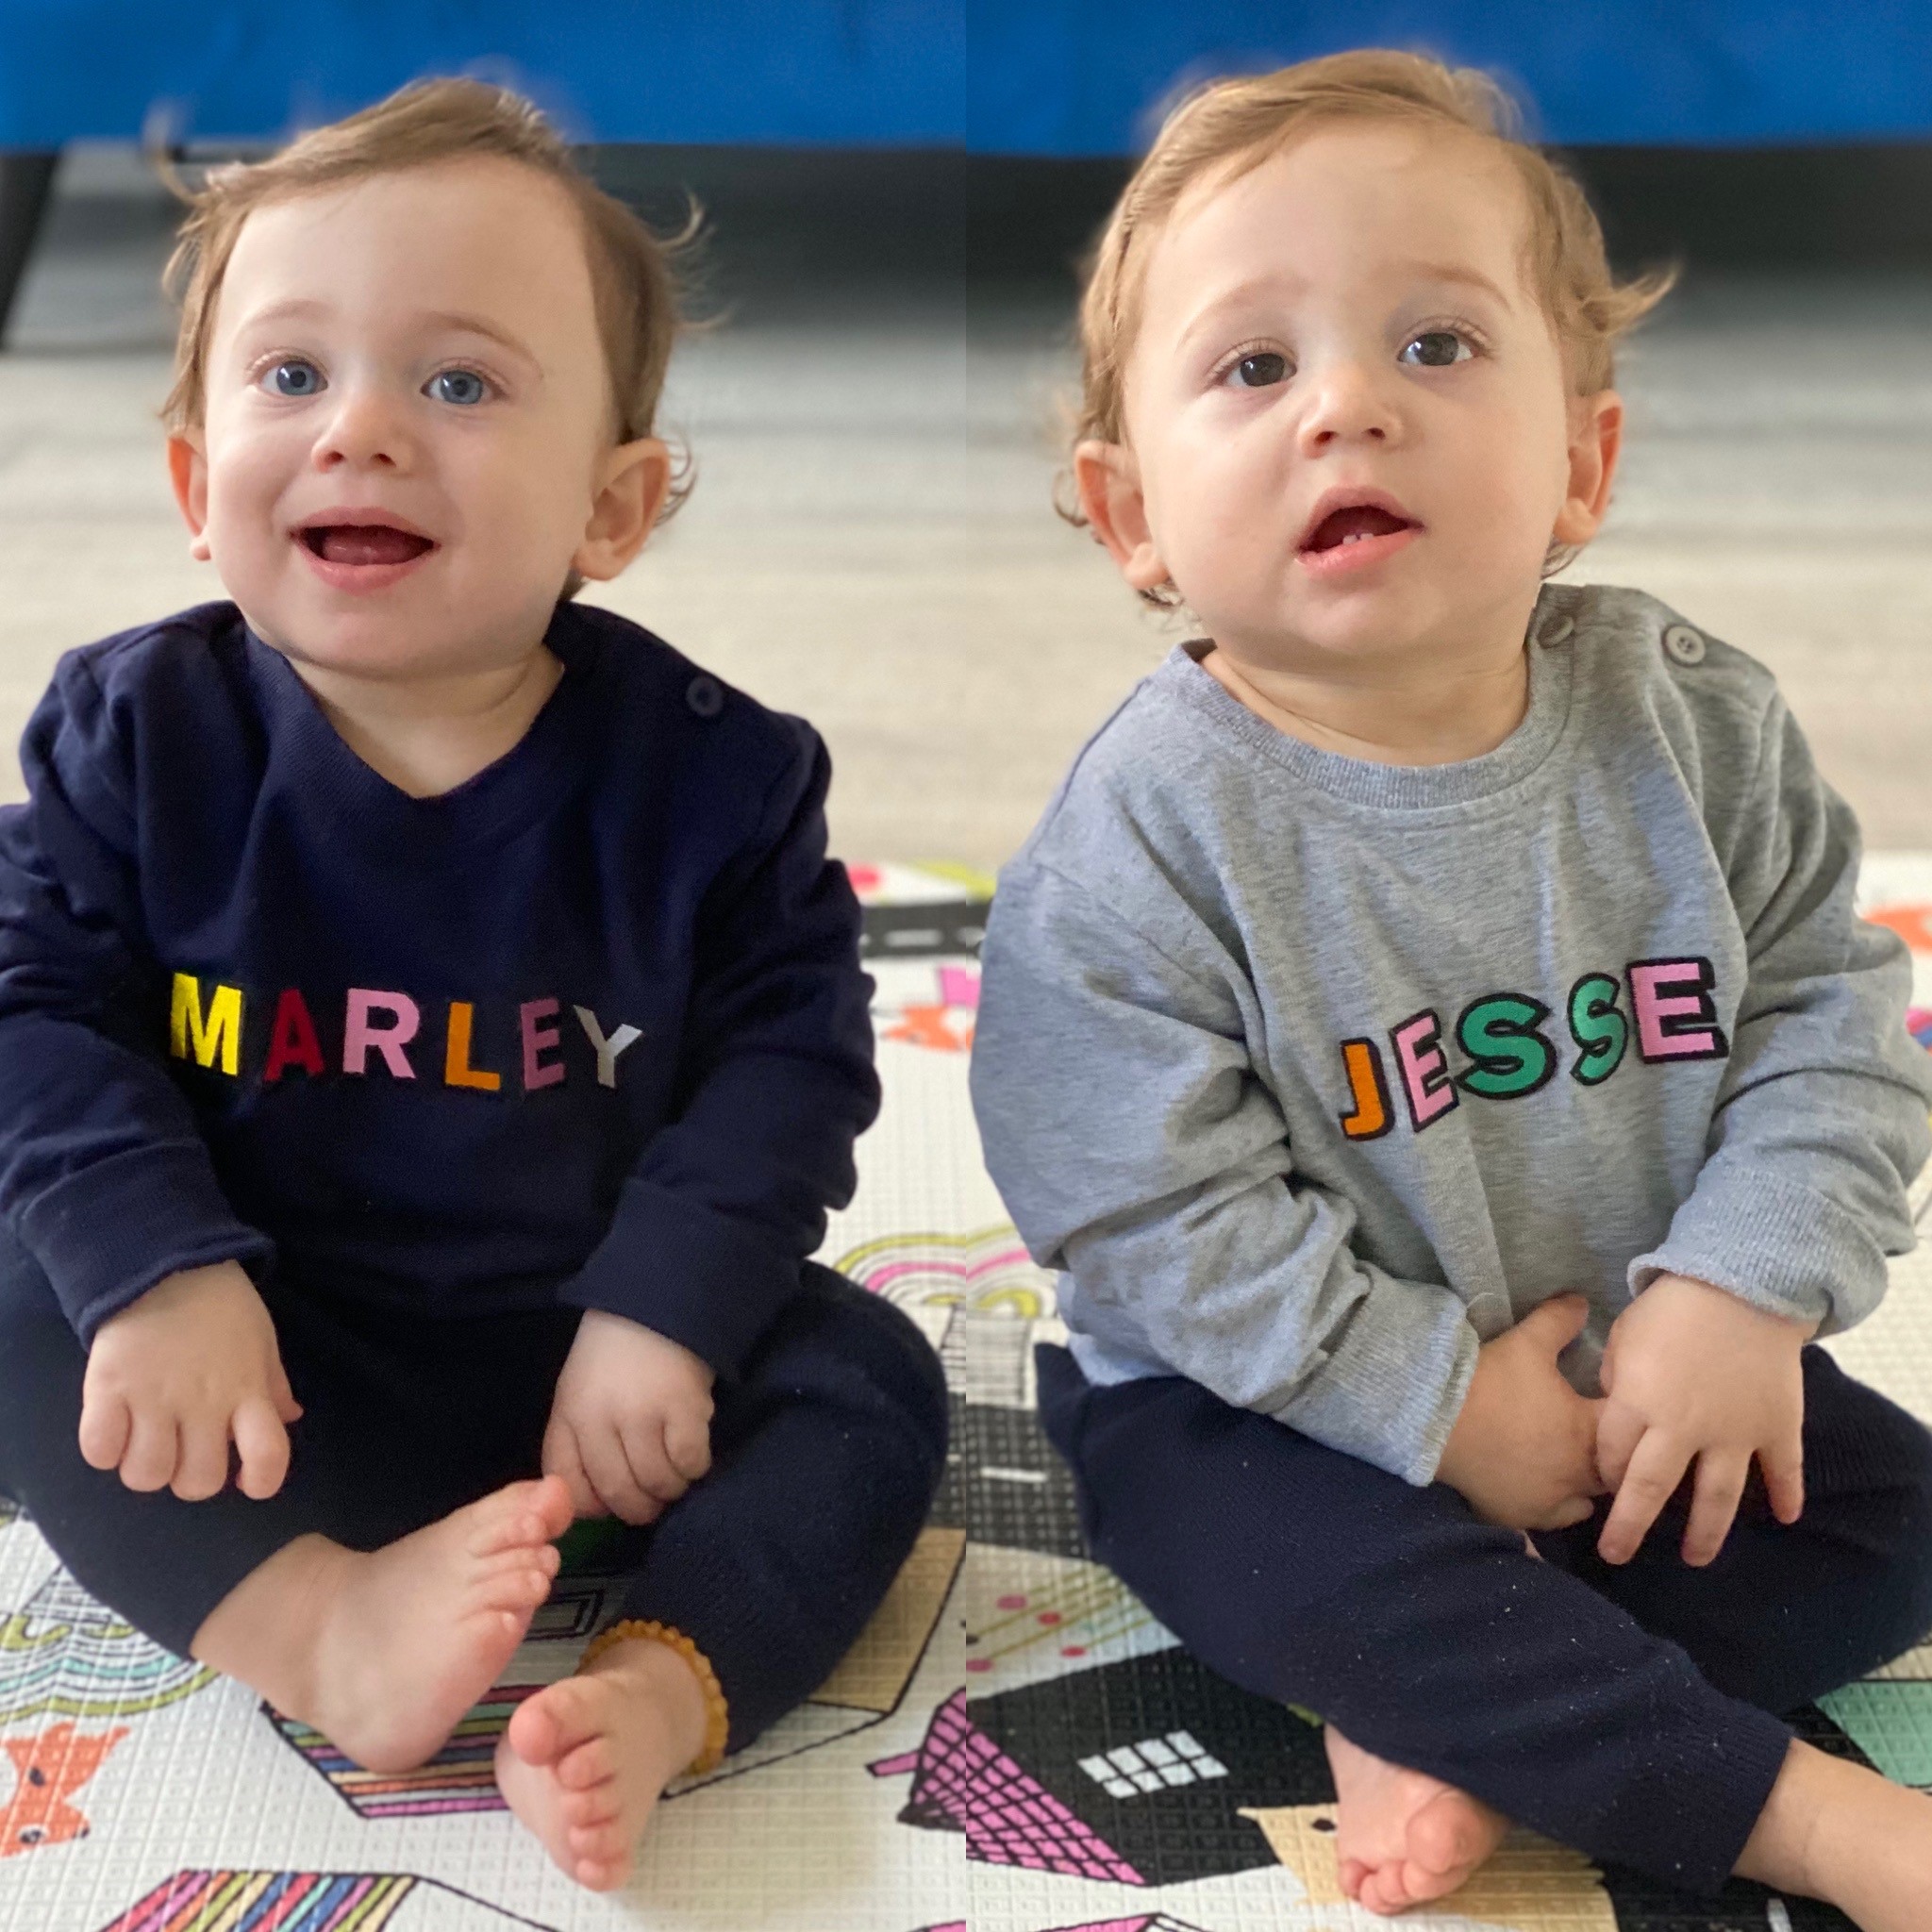 Twin baby brothers modelling custom sweatshirts, one navy and one grey, both with rainbow coloured letters spelling their names